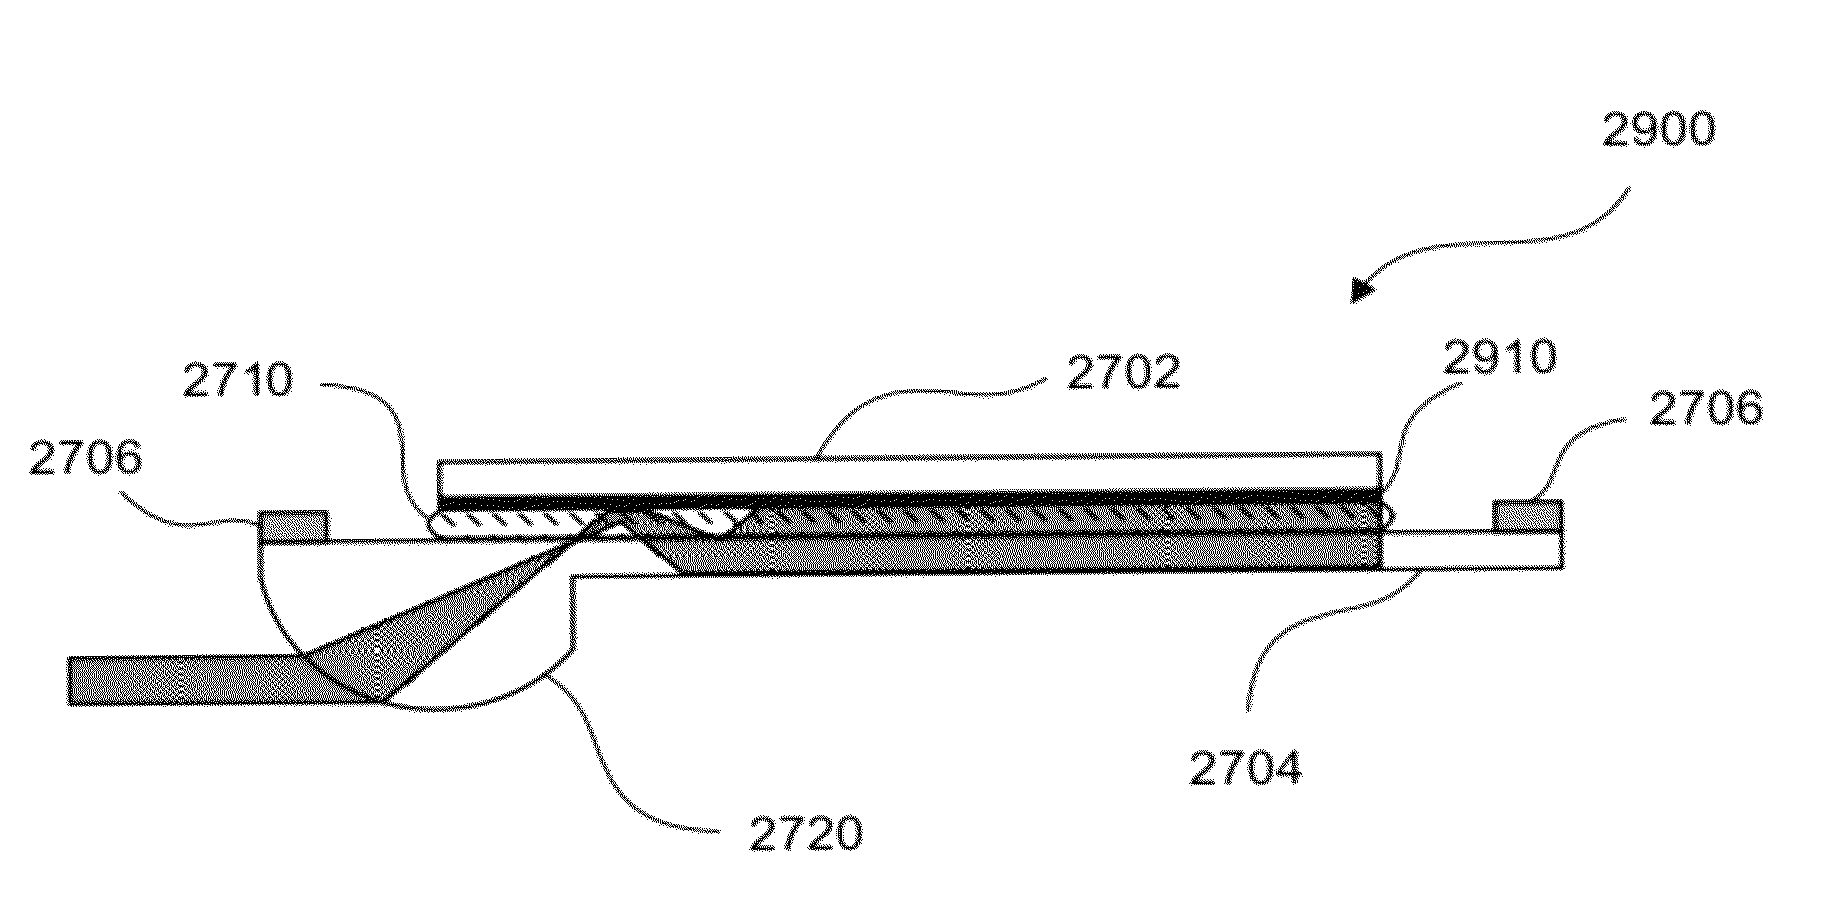 Planar optical waveguide with core of low-index-of-refraction interrogation medium